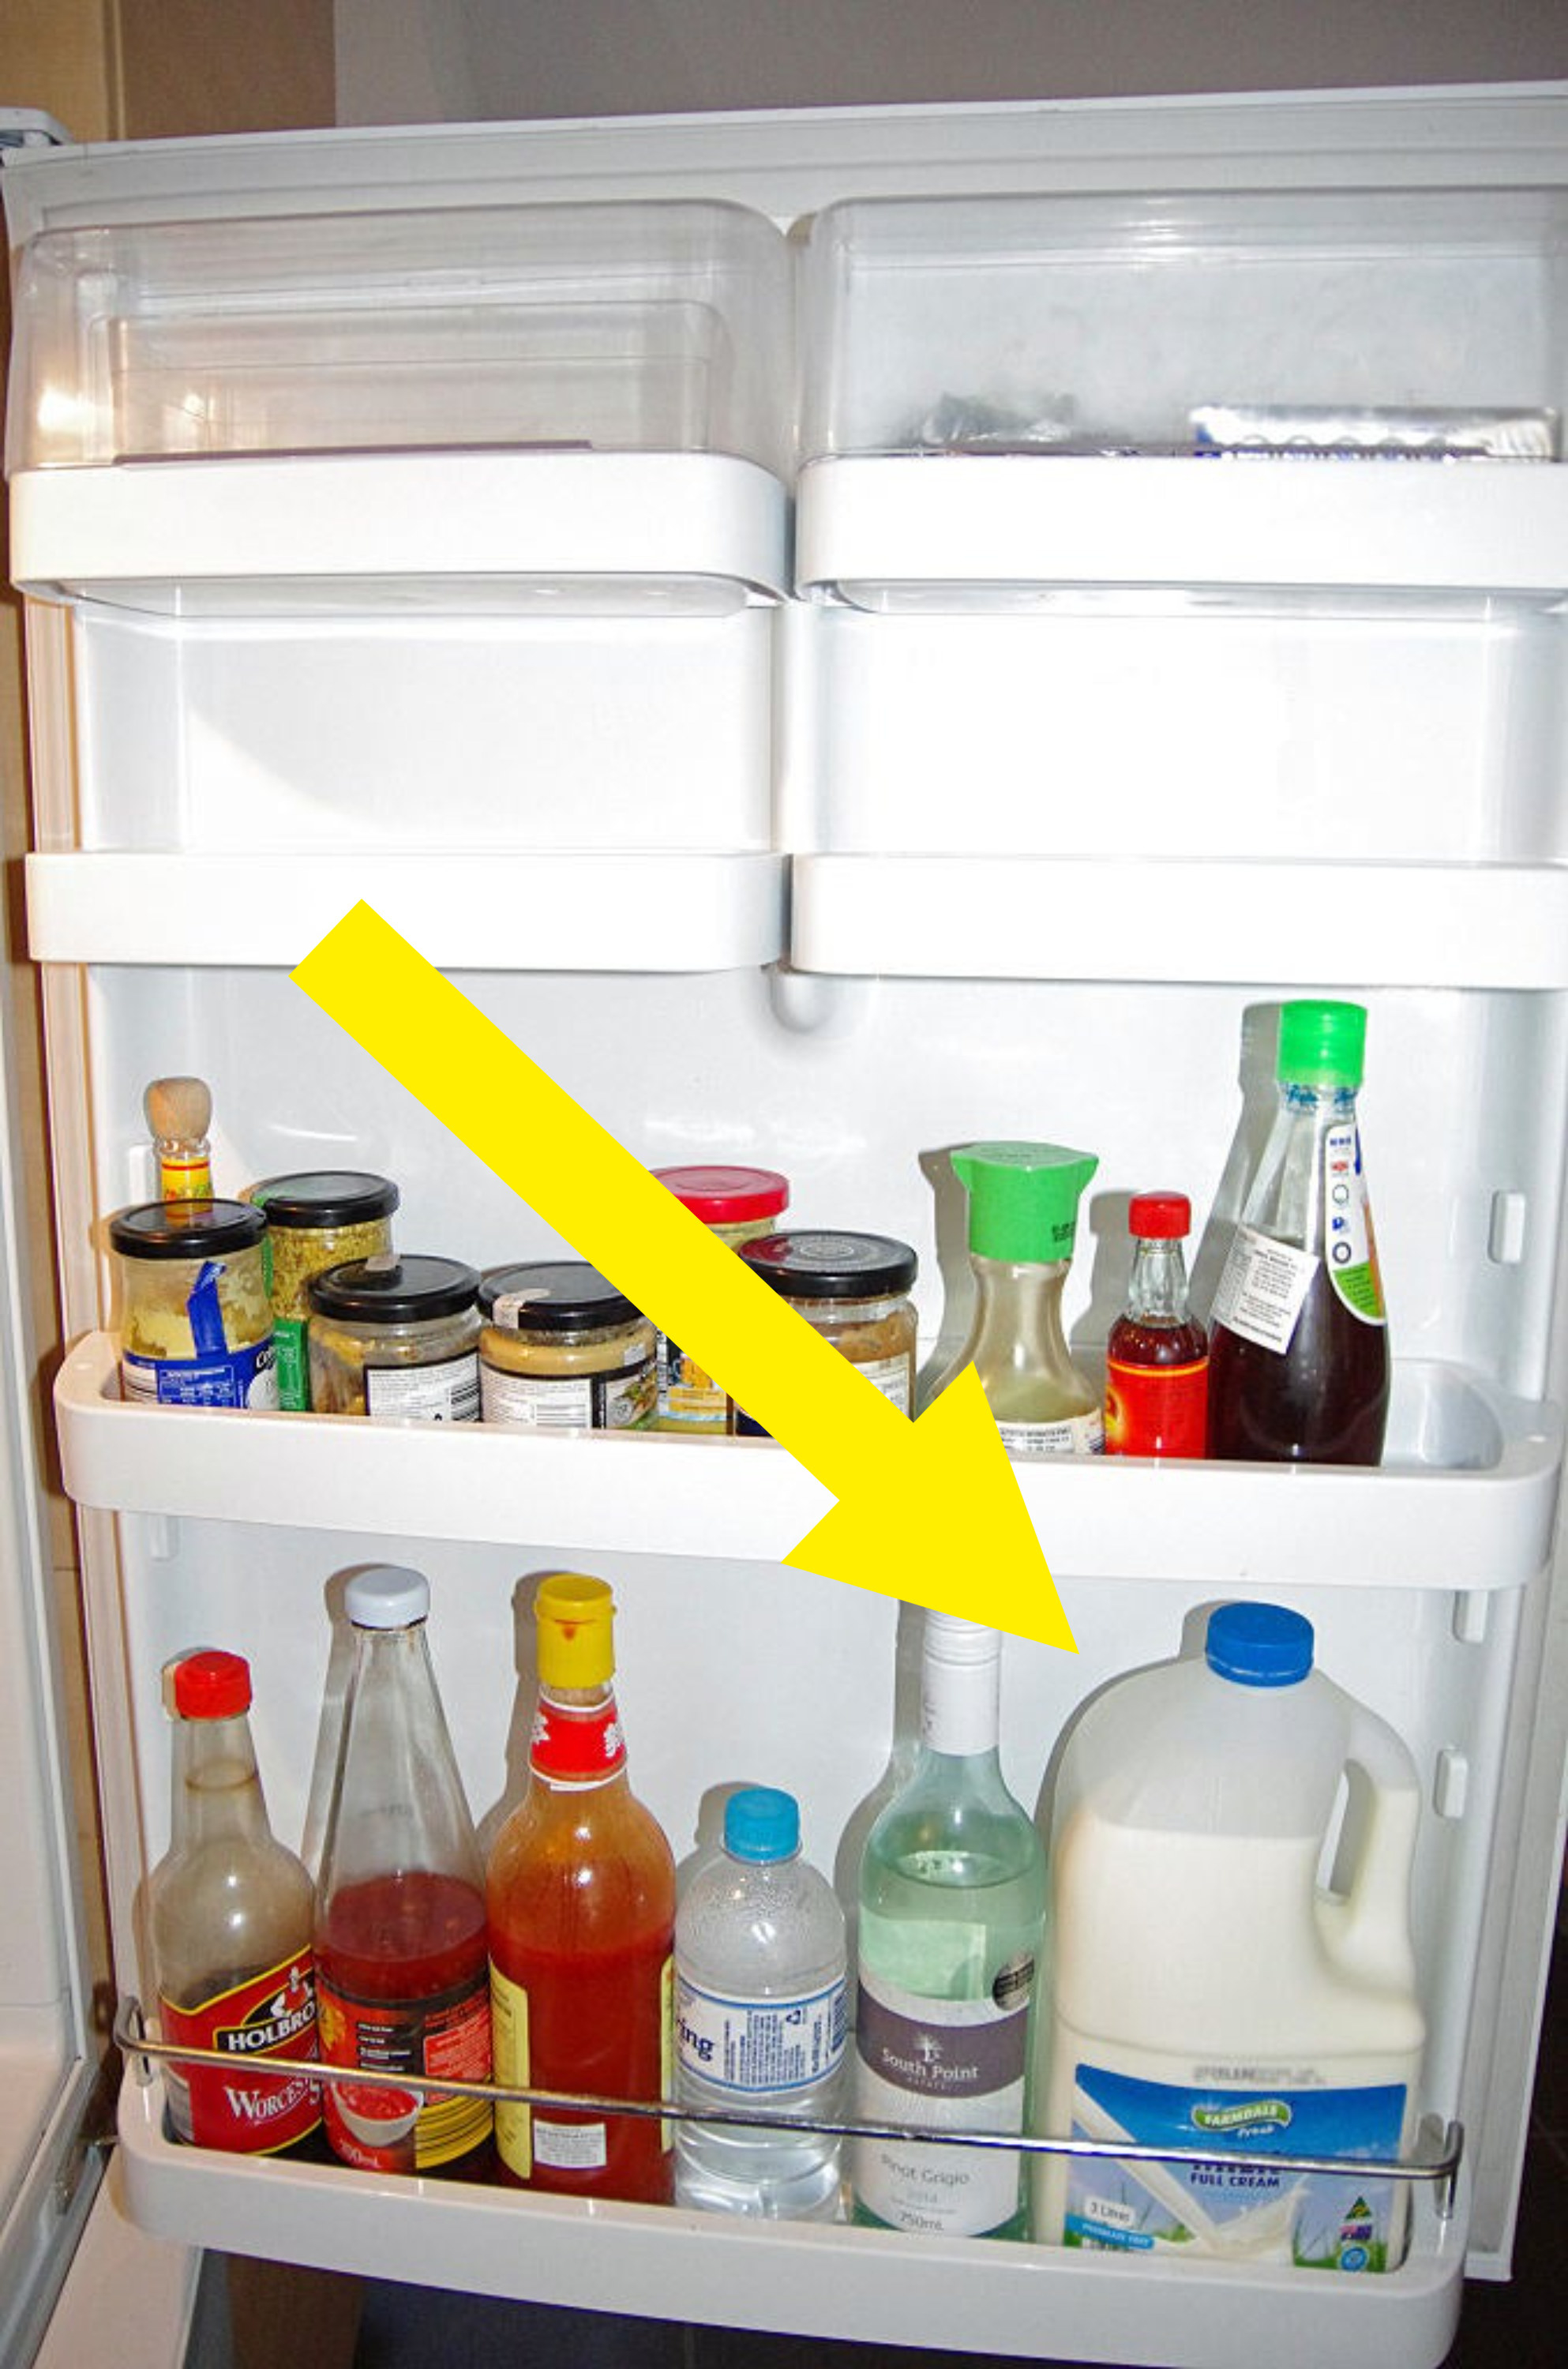 Condiments, sauces, alcohol and milk stored in the door of a home fridge.